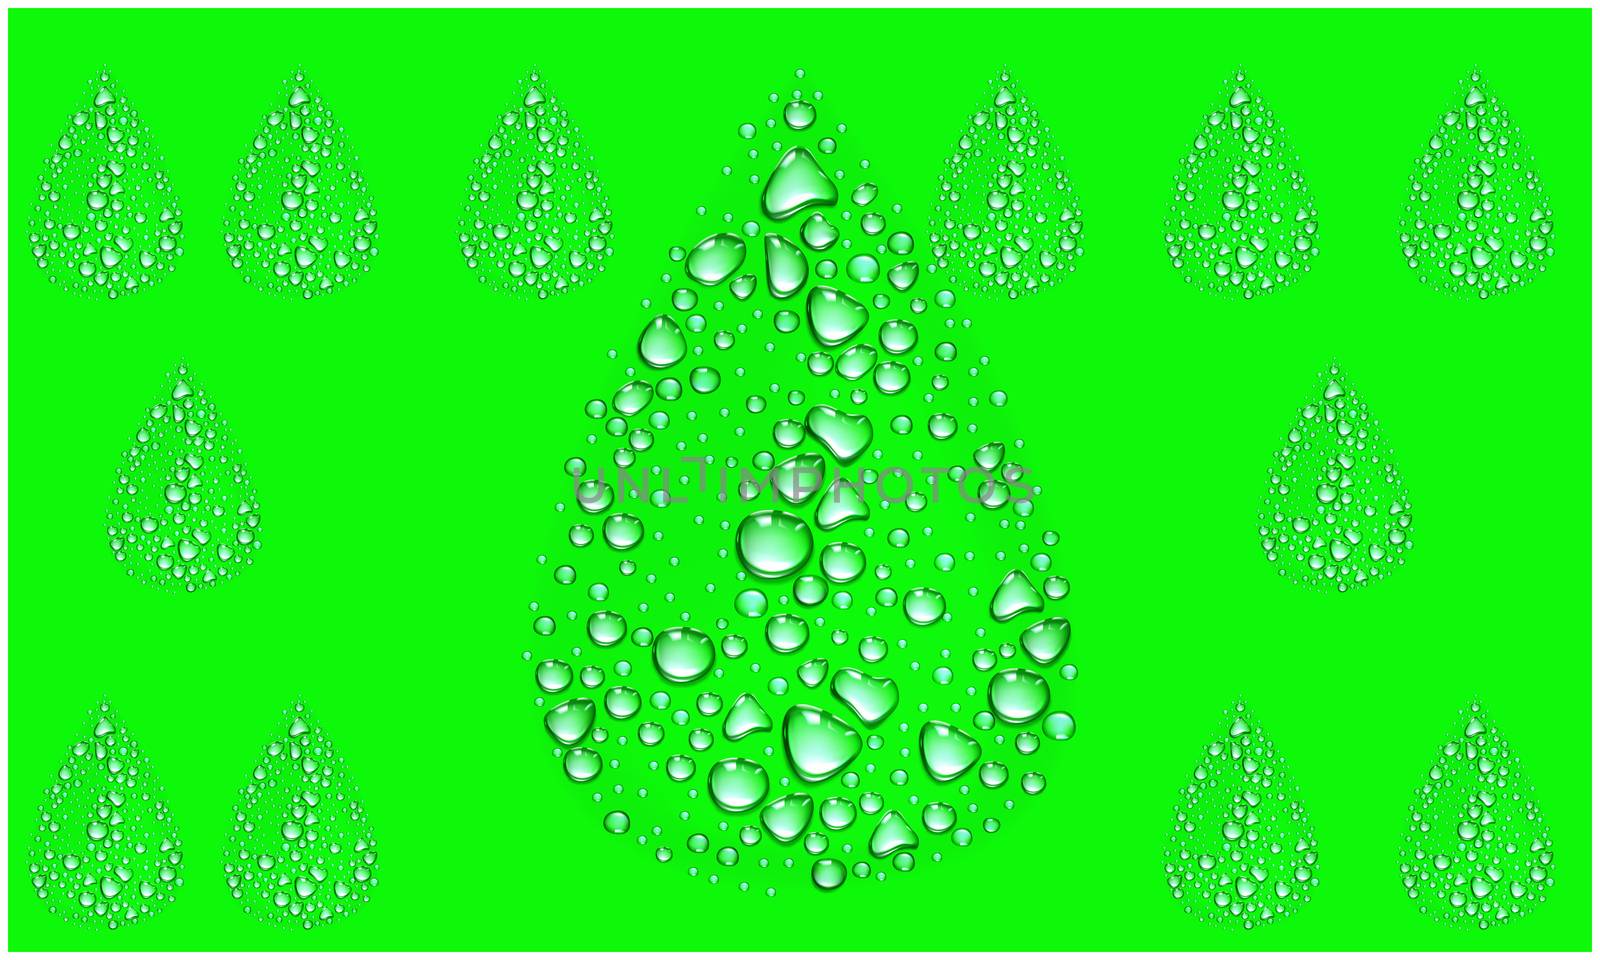 Several Water Droplet on abstract green background by aanavcreationsplus